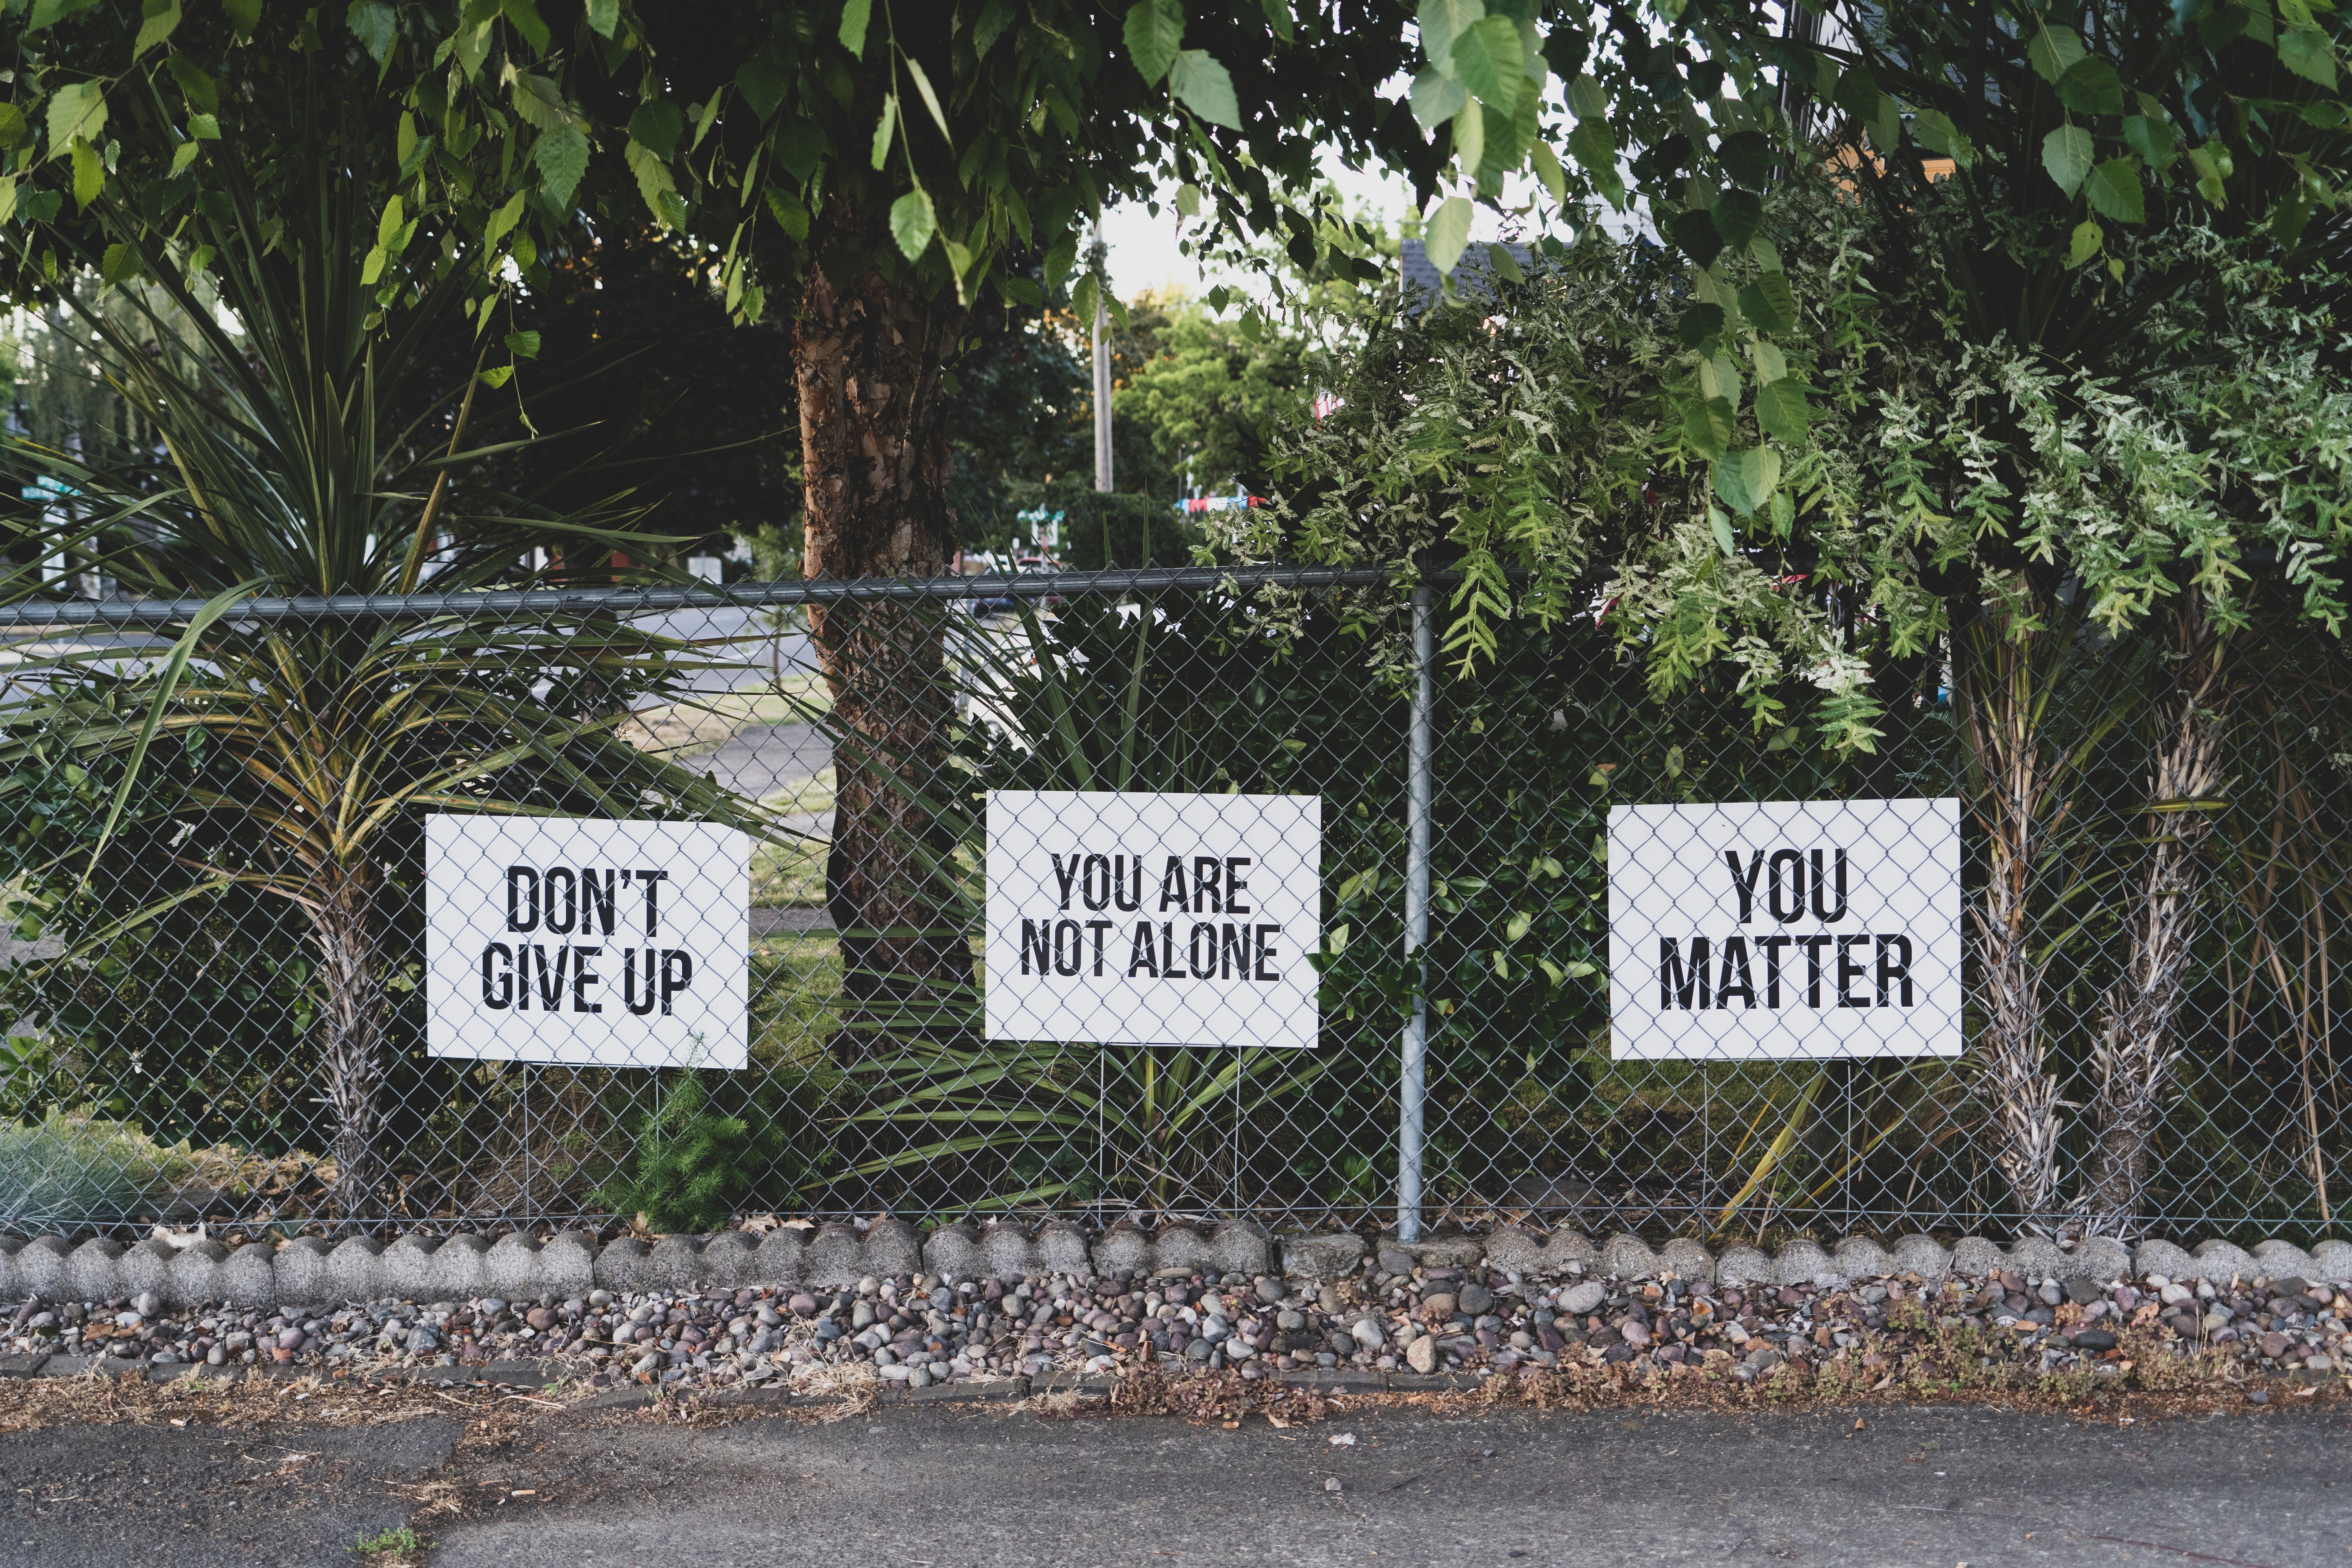 Motivational and Supportive Messages Attached To A Chain-link Fence. "Don't give up" You are not alone" You matter"